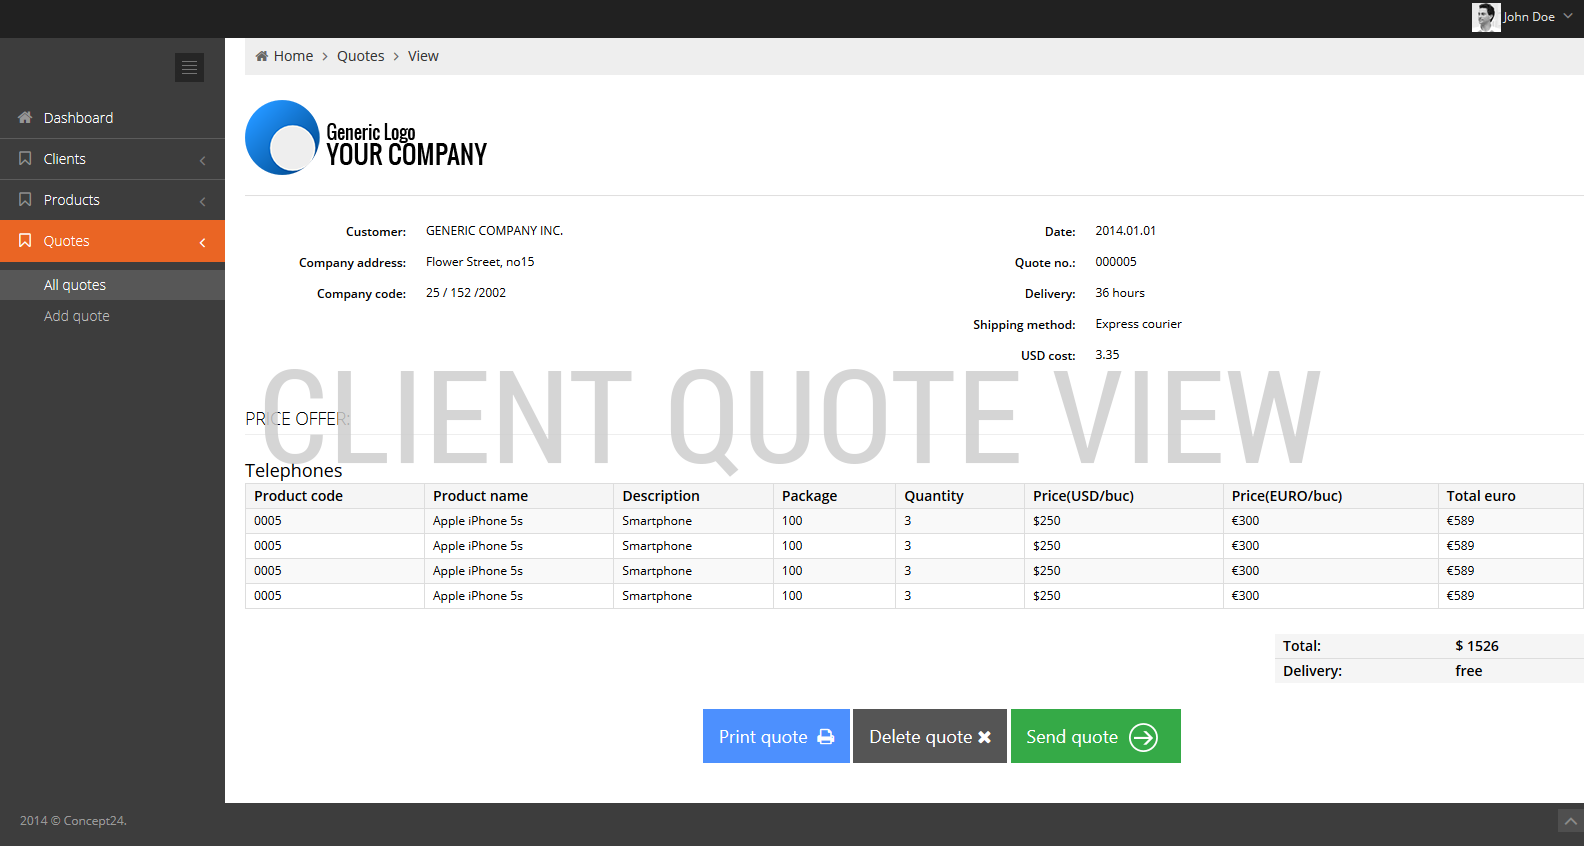 Quoting software / Client quote view / Concept24